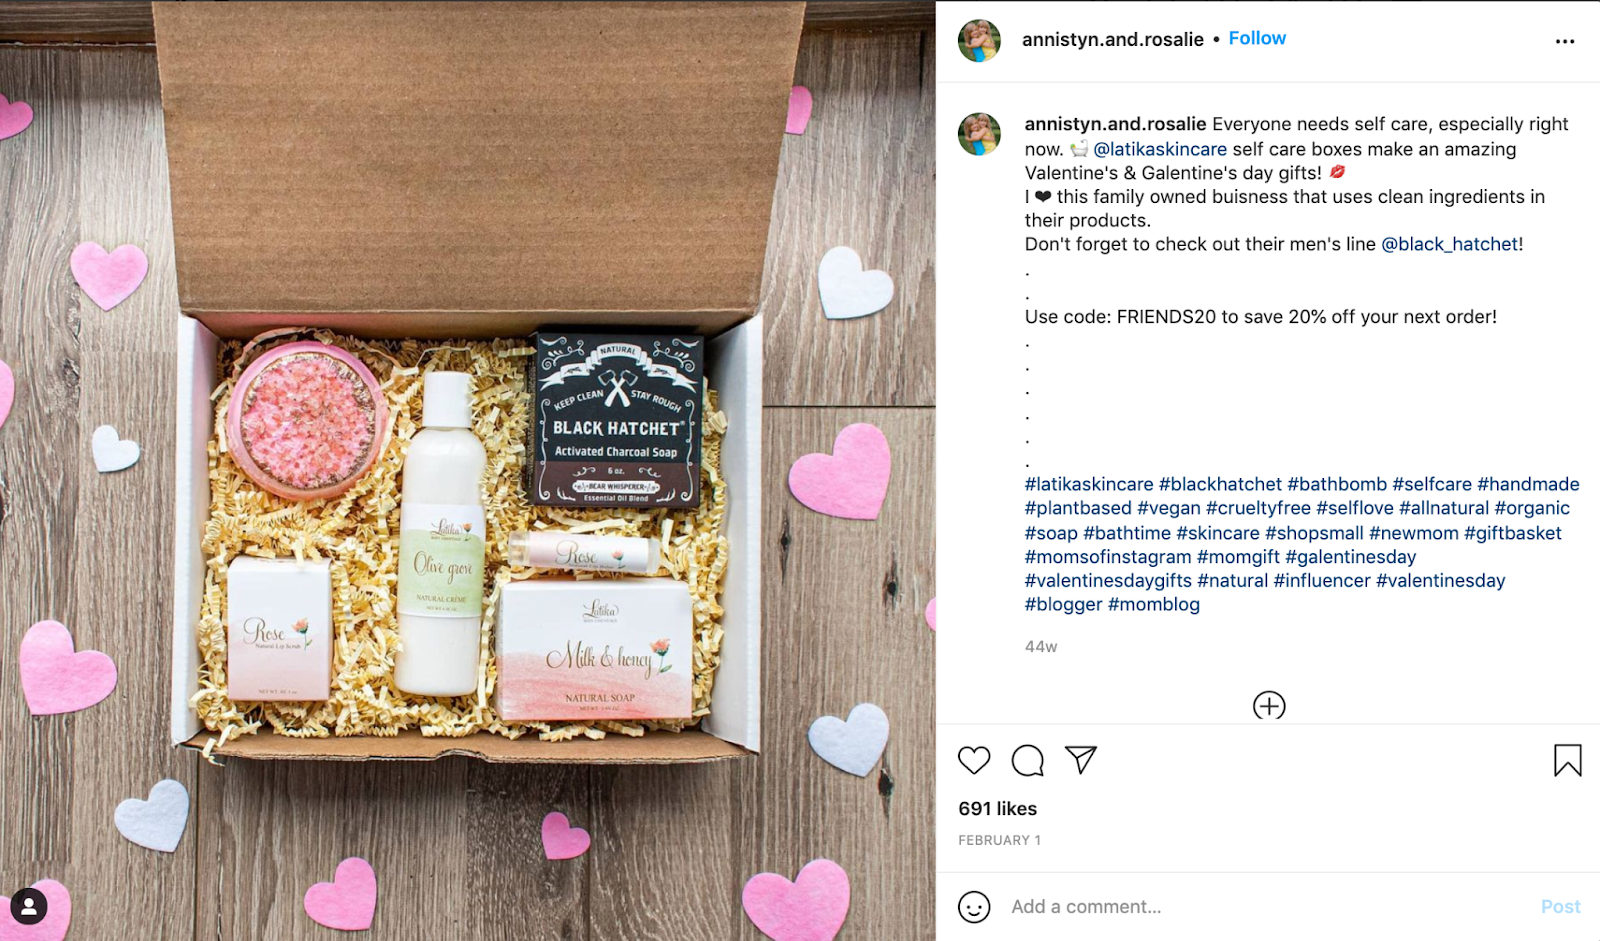 Screenshot of an Instagram post featuring a Valentine's Day selfcare box filled with skincare items from the brand Latika Skincare, next to a caption shouting out the brand